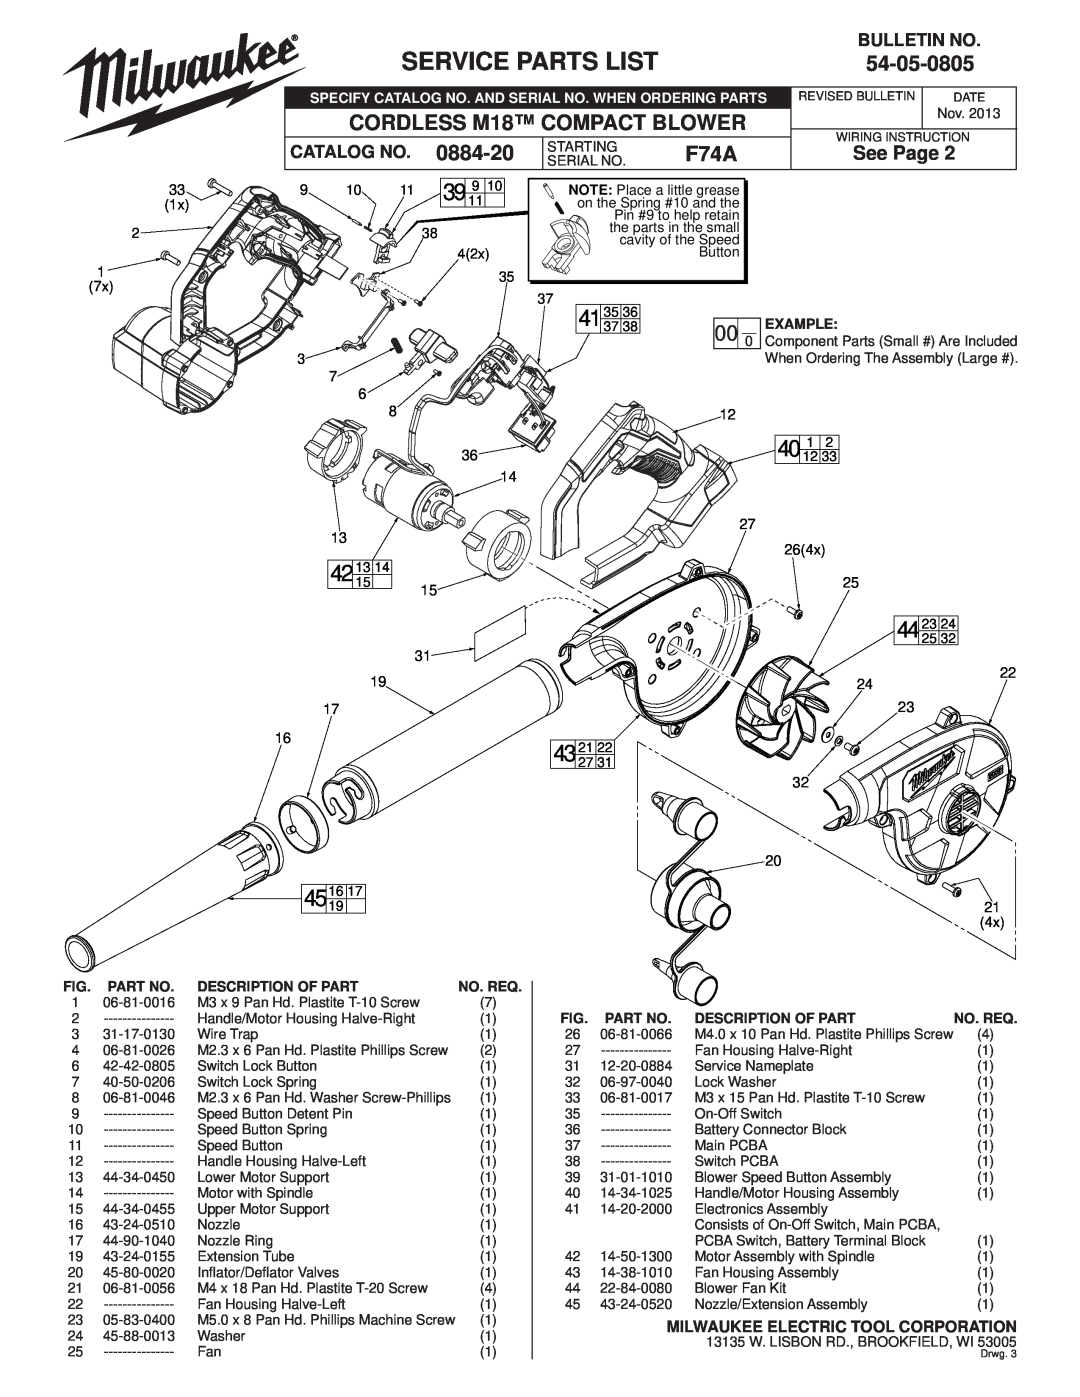 Milwaukee 0884-20 manual Service Parts List, 40 1, 54-05-0805, F74A, CORDLESS M18 COMPACT BLOWER, See Page, Bulletin No 